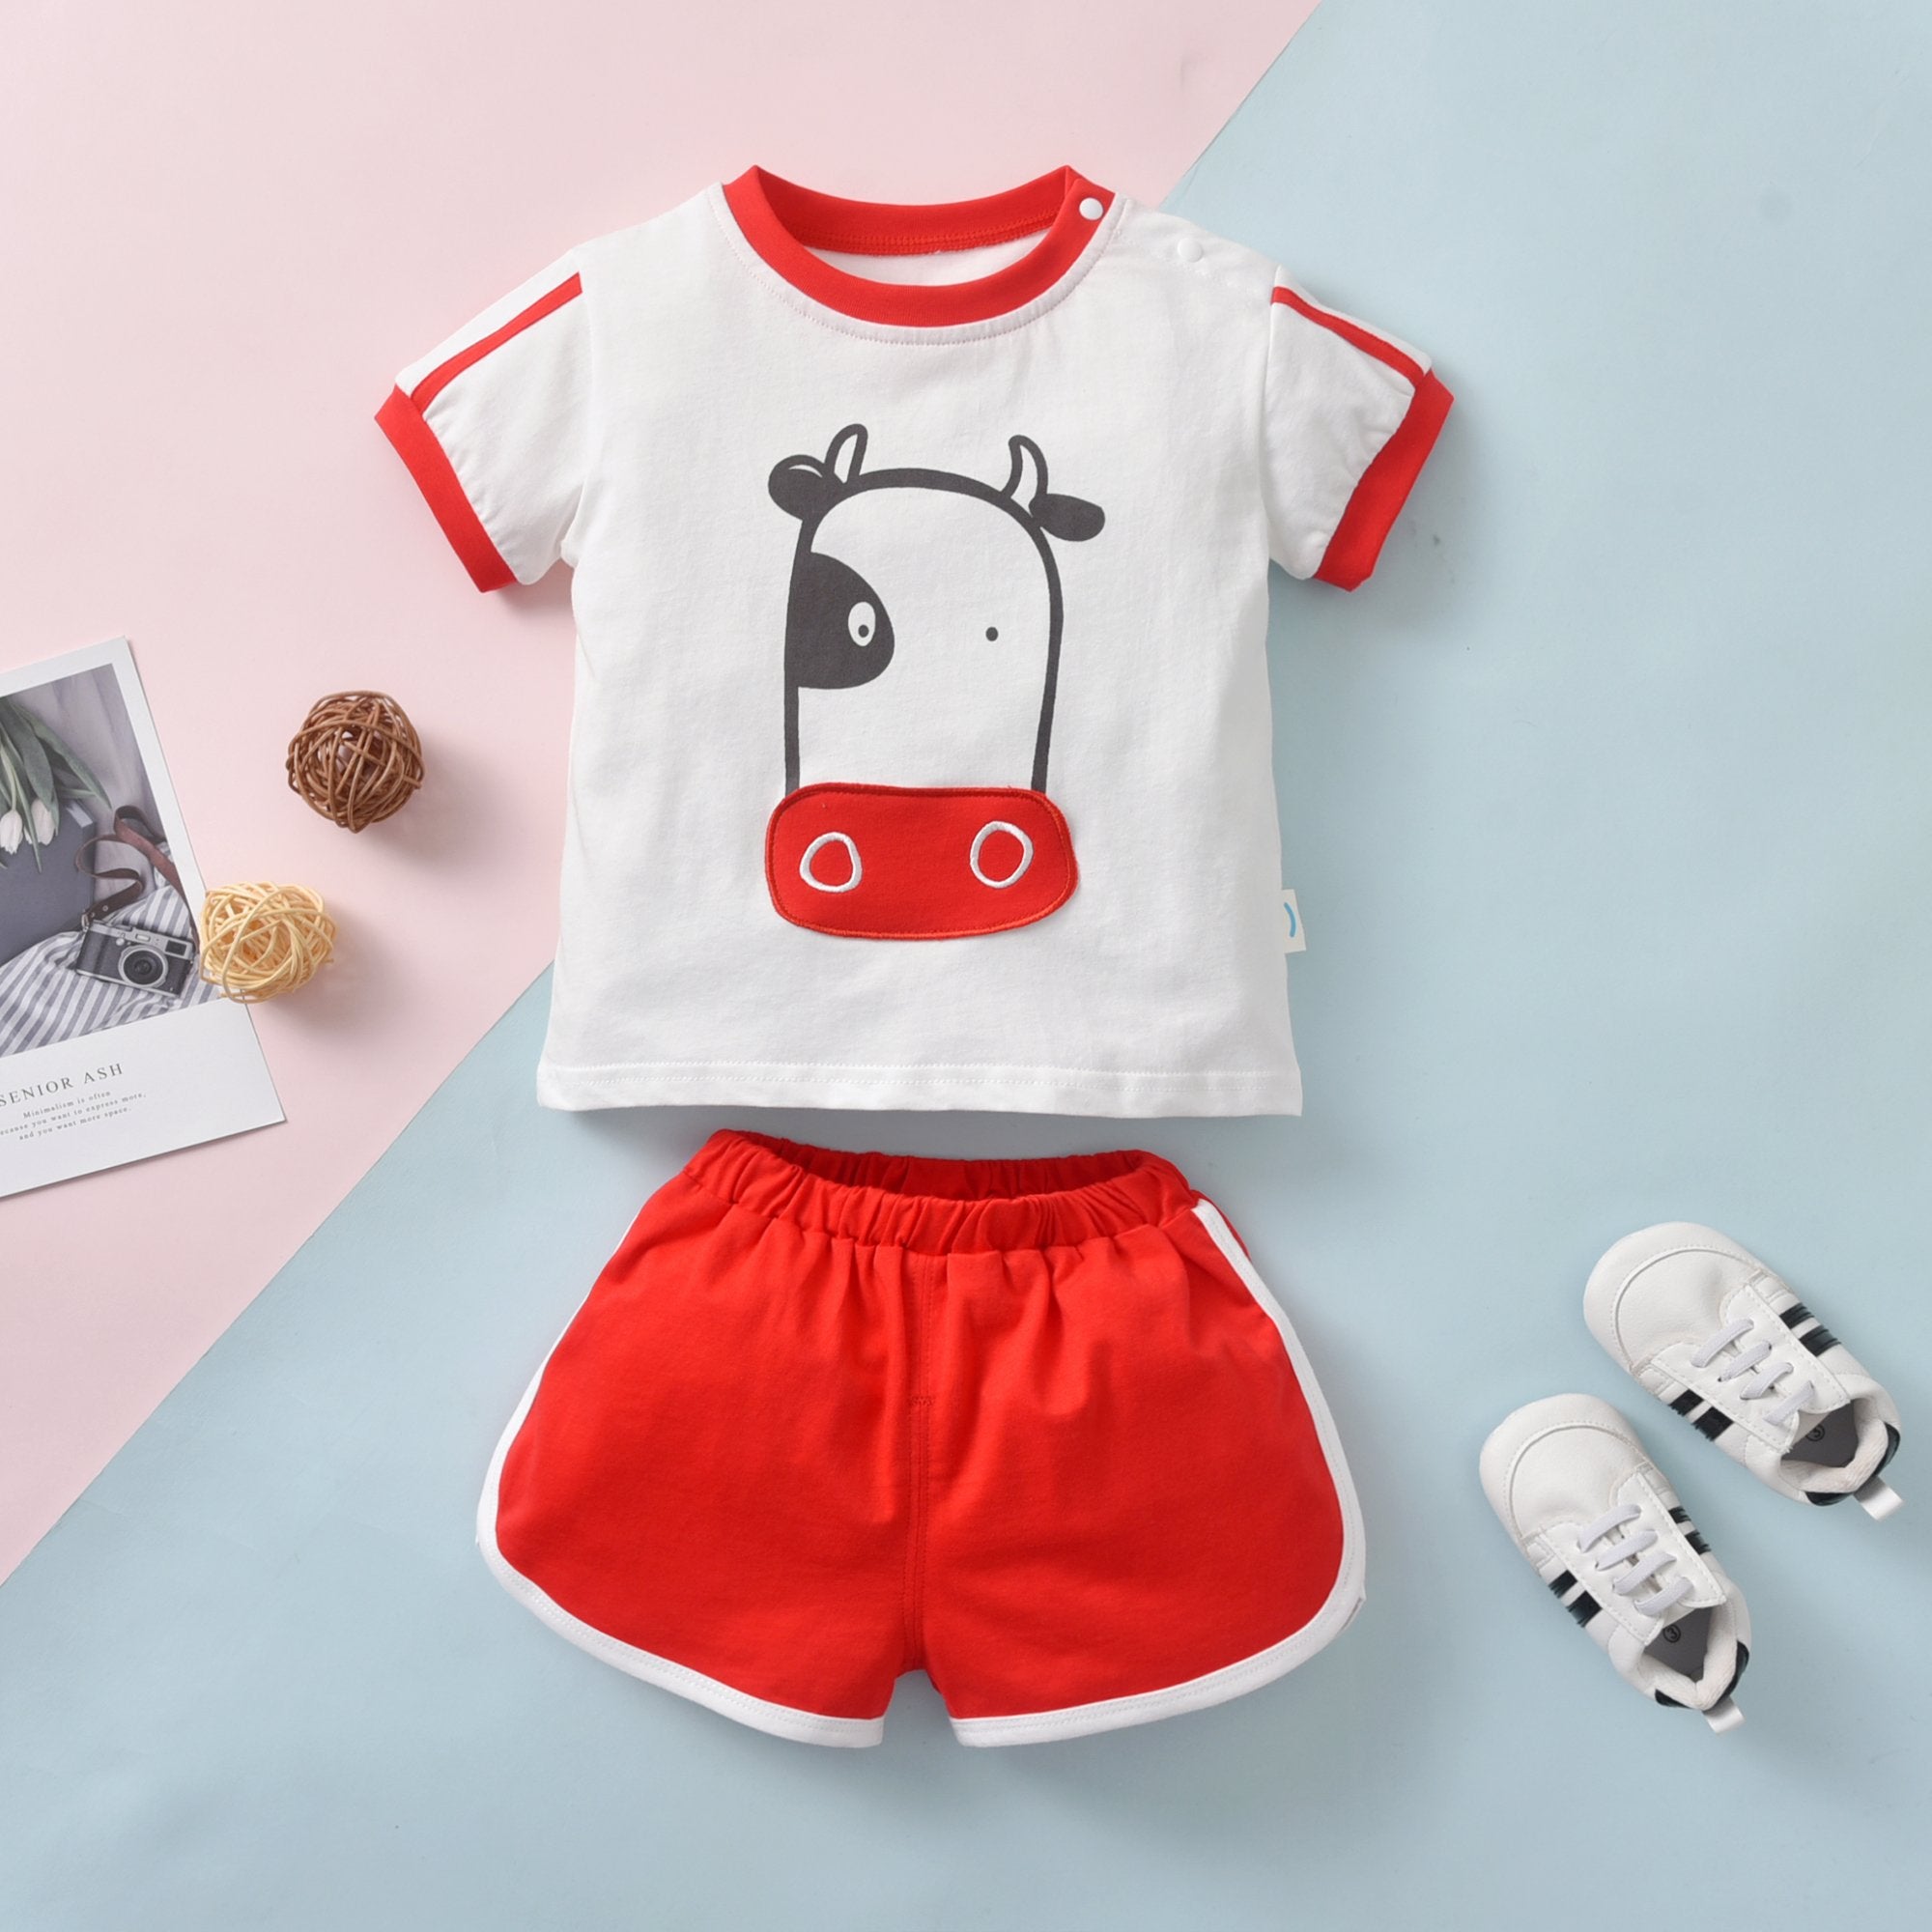 Summer Male And Female Baby Cartoon Cute Animal Print Casual And Comfortable Short-Sleeved Suit Kids Wholesale Clothing